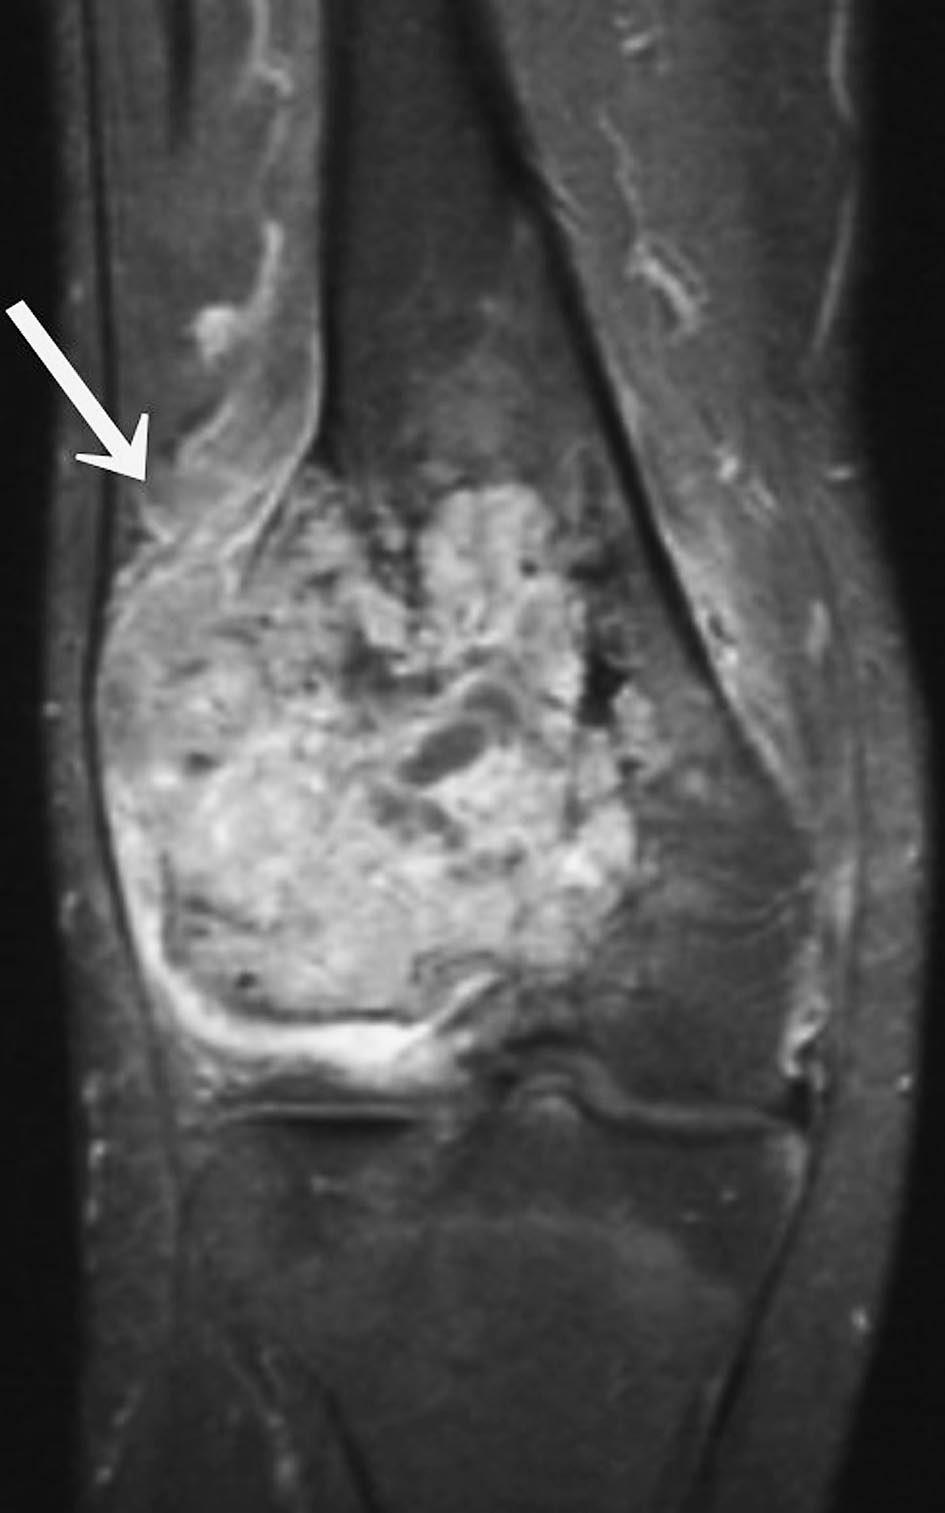 160 K. Hashimoto et al. A B Fig. 5. Coronal T1-weighted fat suppressed MR image of the right distal femur after gadolinium enhancement, in 2004.